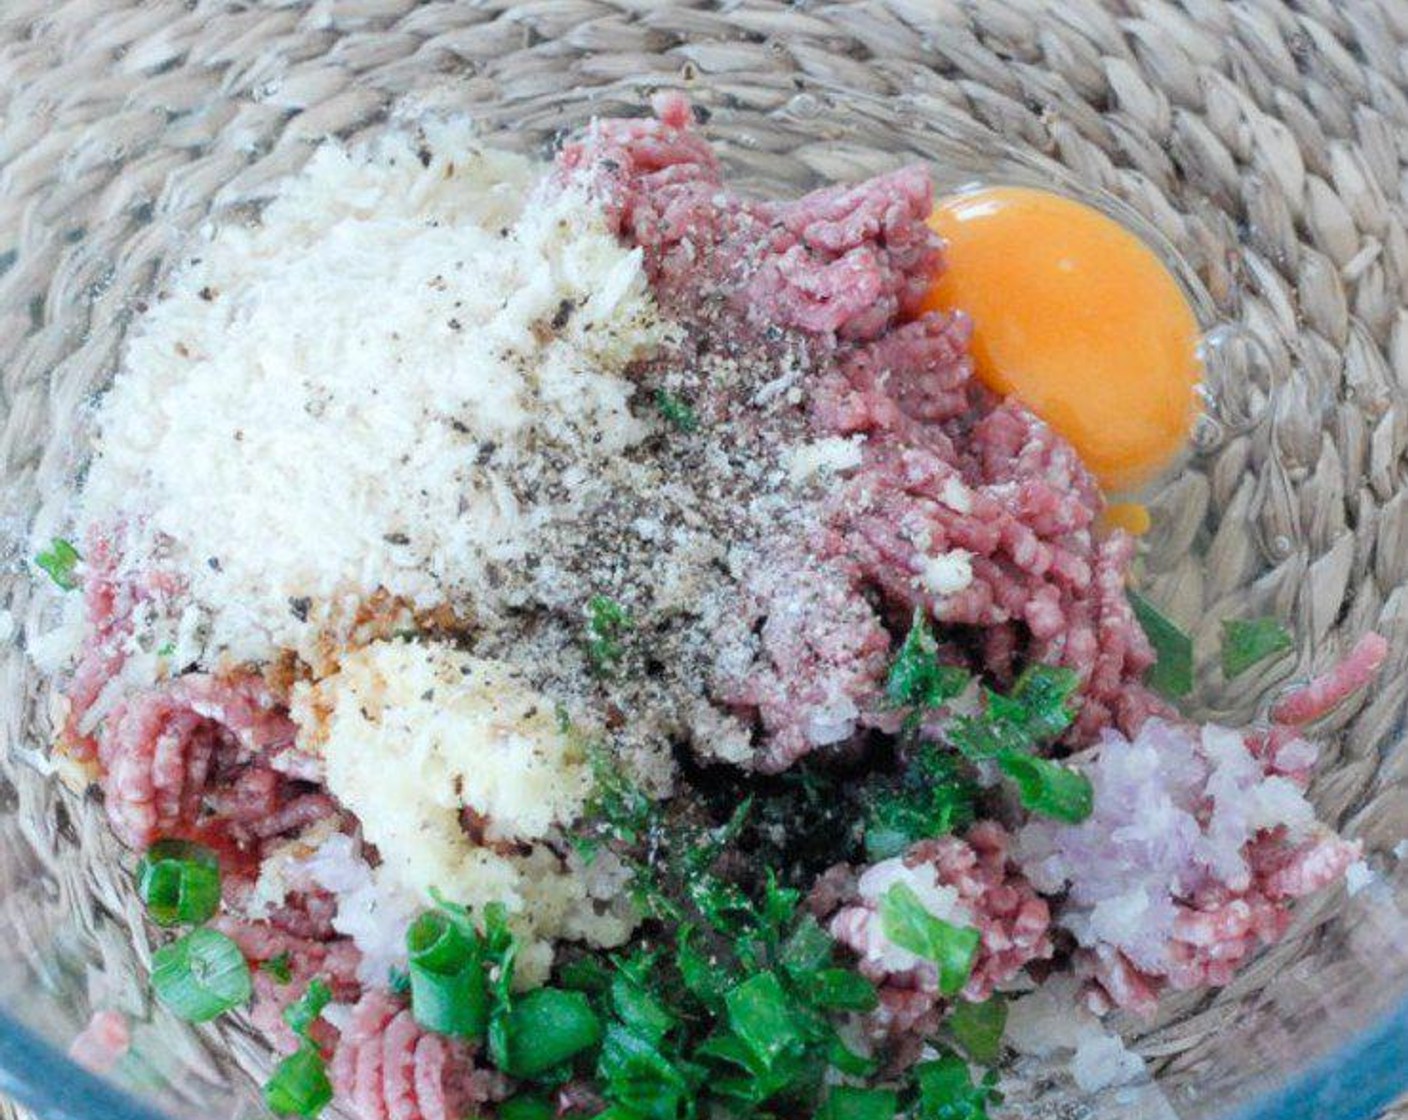 step 2 Mix Ground Beef (10.5 oz), Egg (1), Breadcrumbs (2/3 cup), Garlic (1 Tbsp), Fresh Ginger (1 tsp), and Scallions (to taste) in a big bowl, season with Salt (to taste) and Ground Black Pepper (to taste).